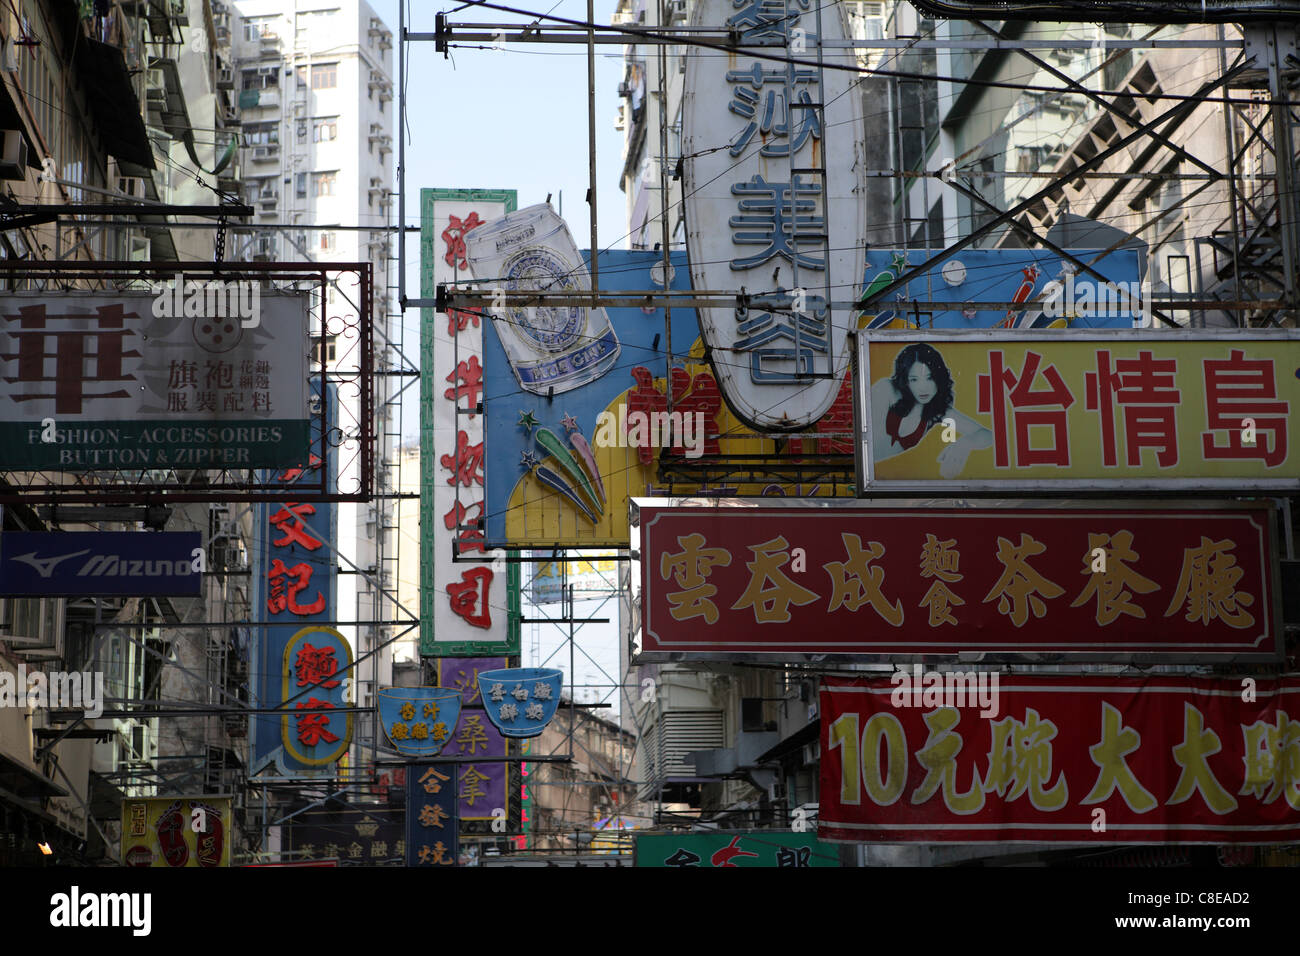 Various signs in Chinese script, on shopping street in Kowloon, Hong Kong, China, Asia Stock Photo